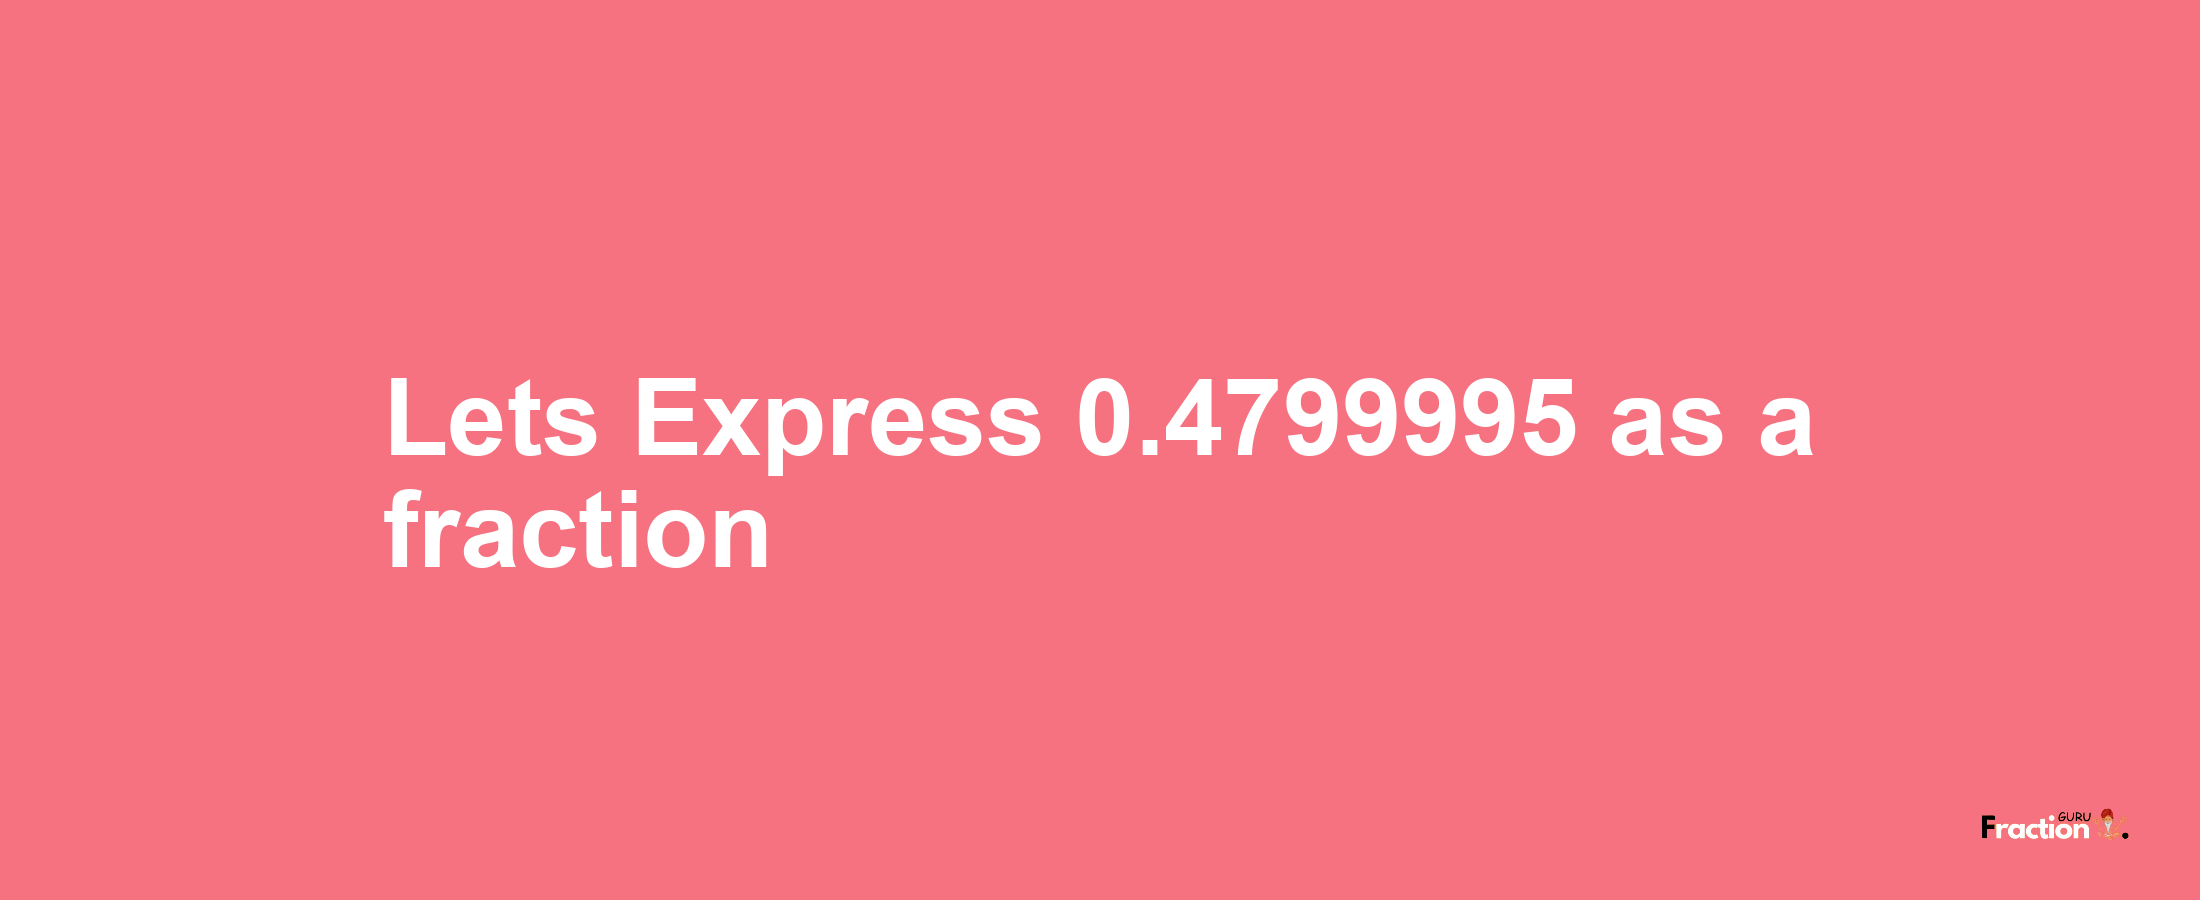 Lets Express 0.4799995 as afraction